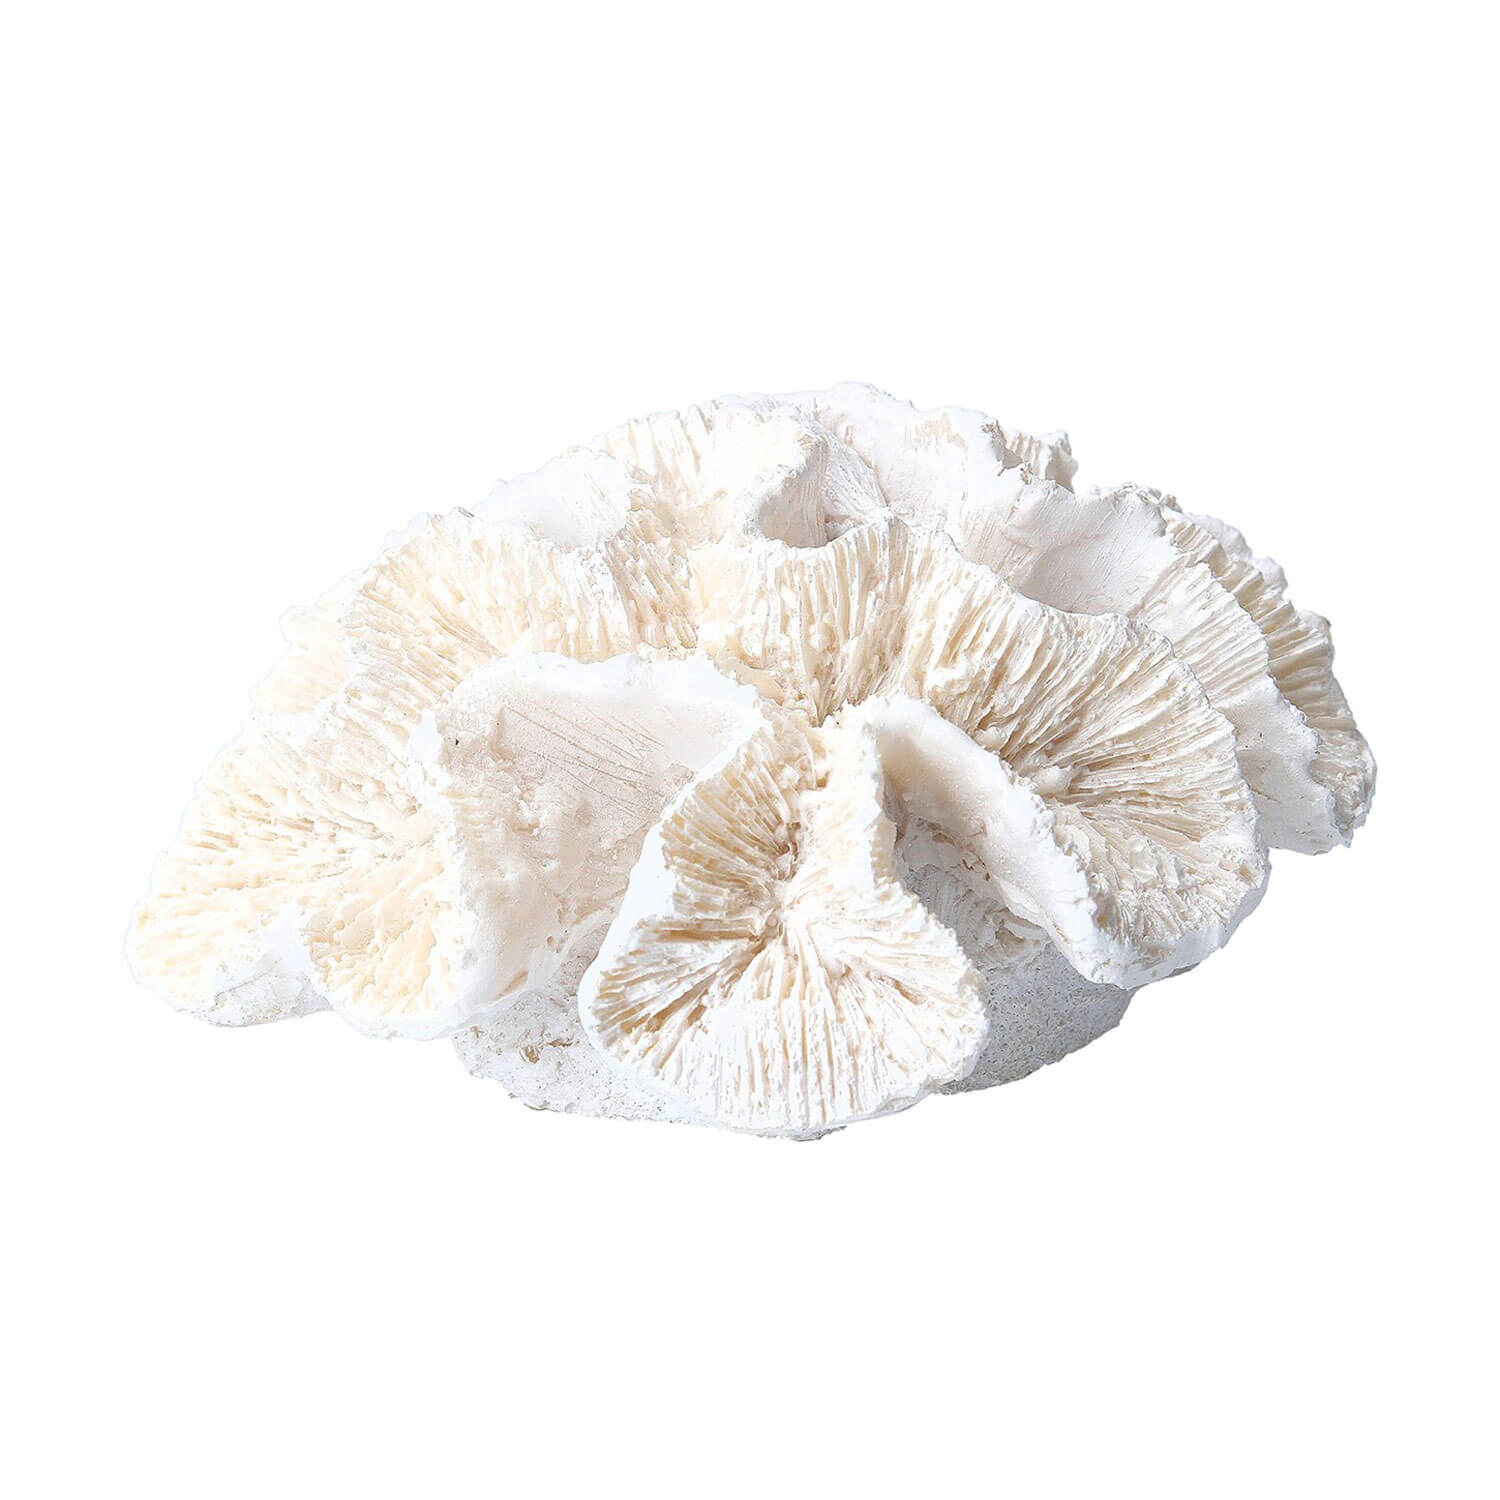 Gisella Graham Resin Frill Coral Ornament - Small 1 Shaws Department Stores